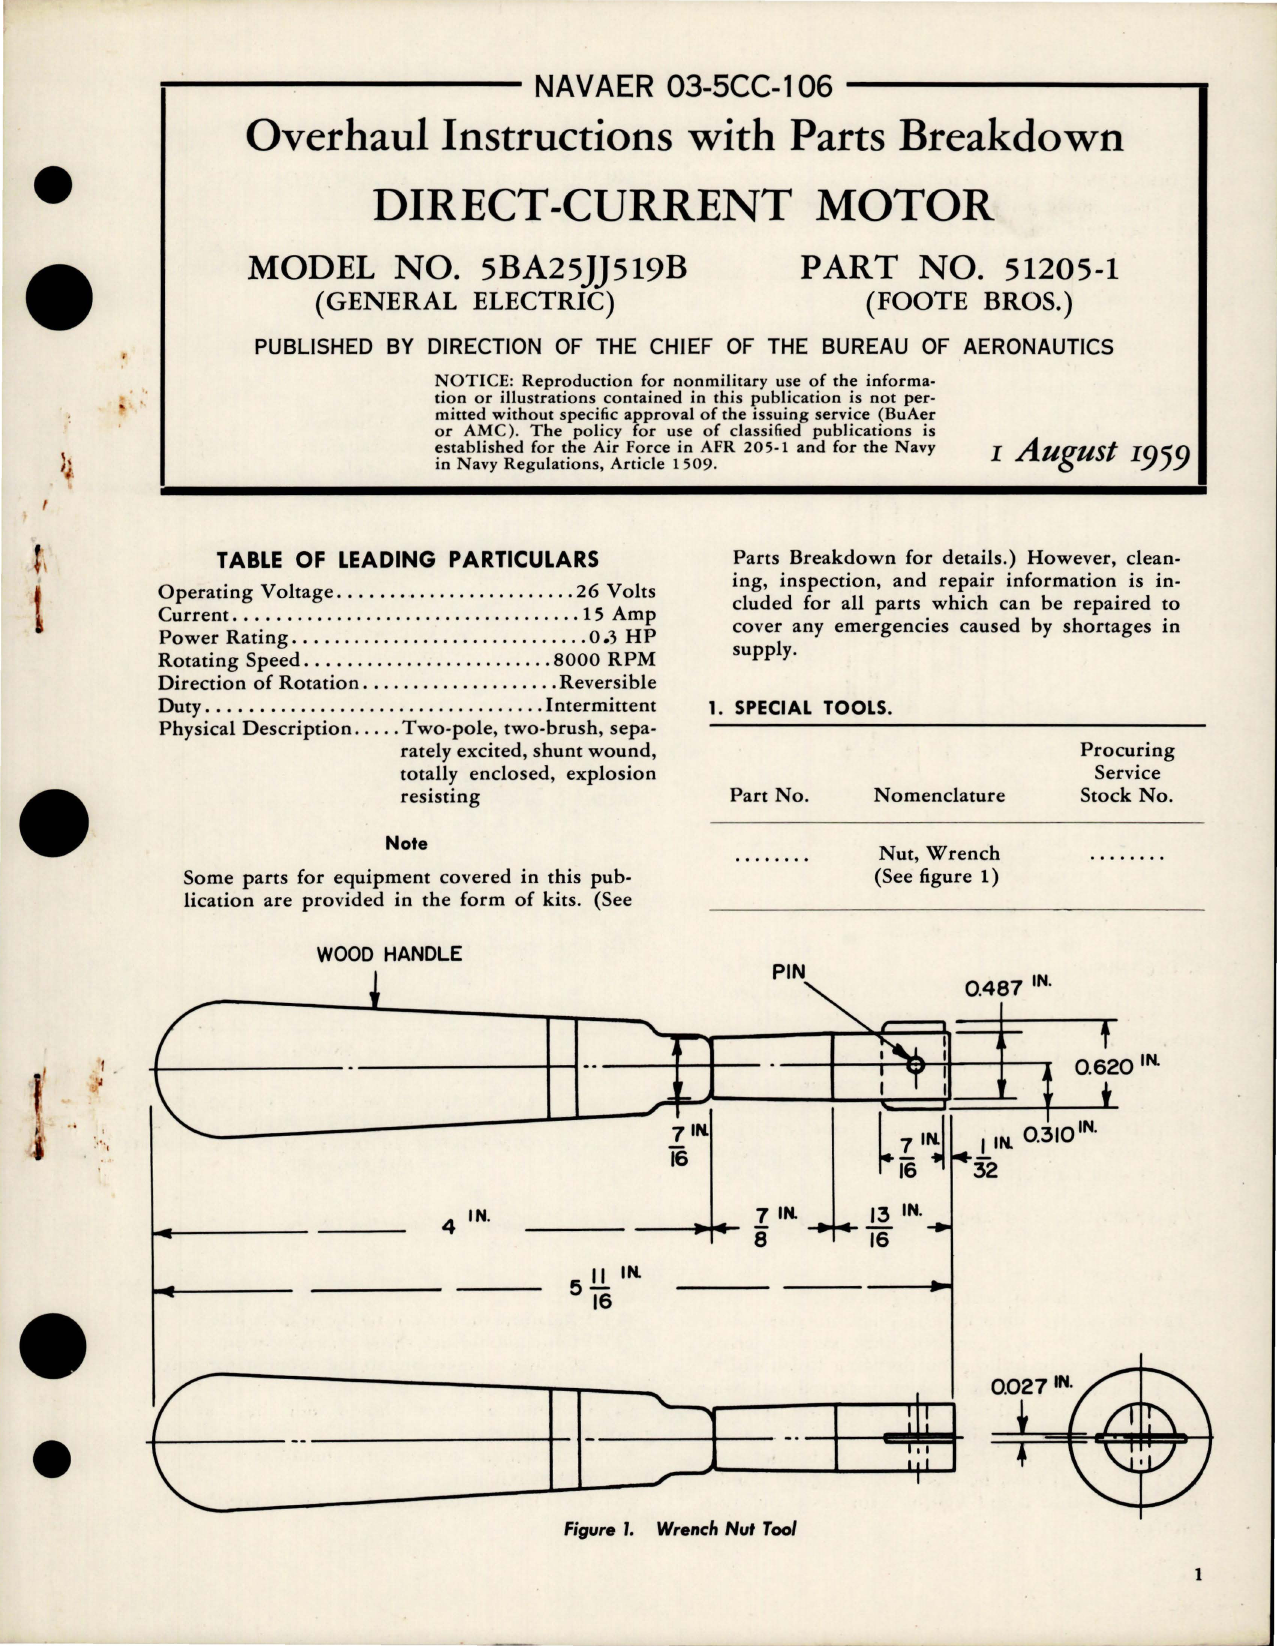 Sample page 1 from AirCorps Library document: Overhaul Instructions with Parts Breakdown for Direct Current Motor - Part 51205-1 - Model 5BA25JJ519B 